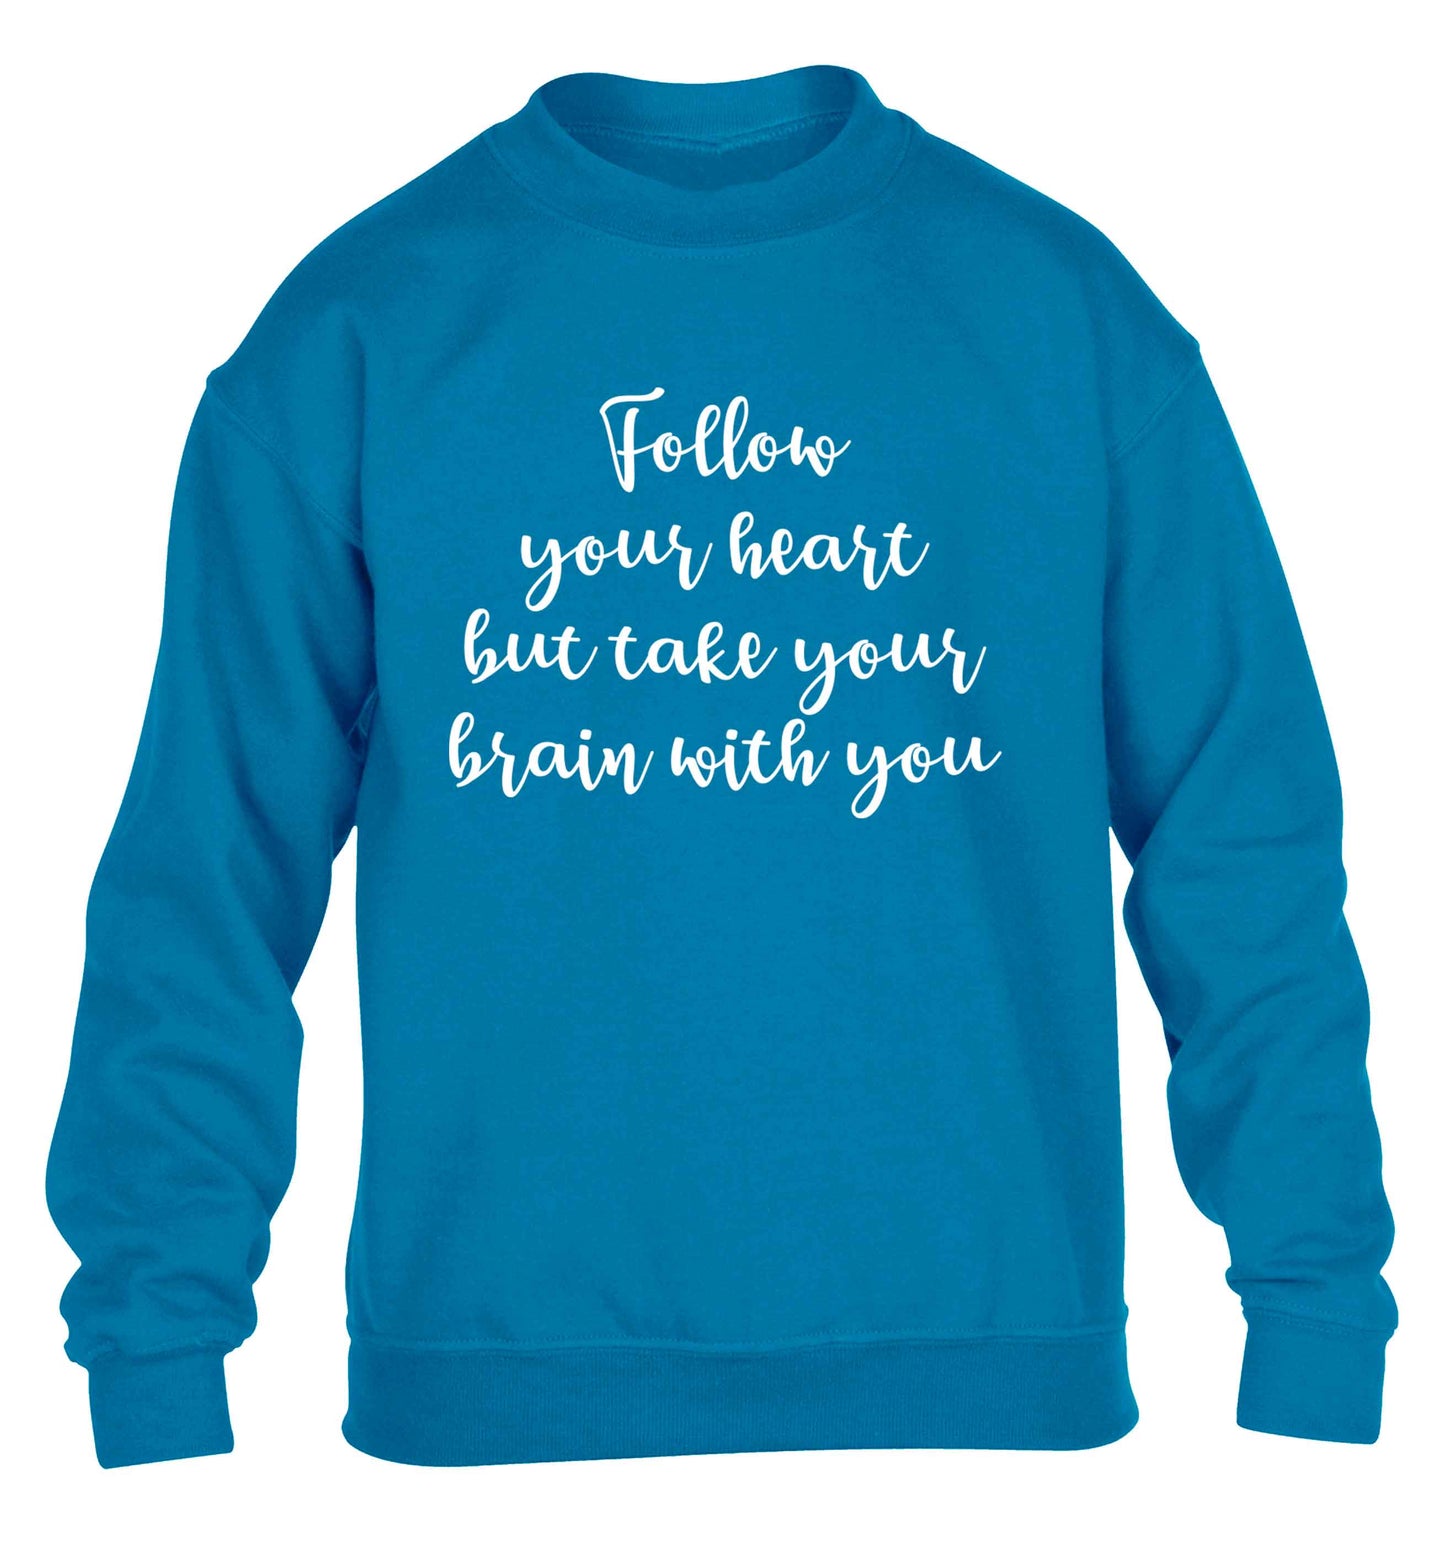 Follow your heart but take your head with you children's blue sweater 12-13 Years